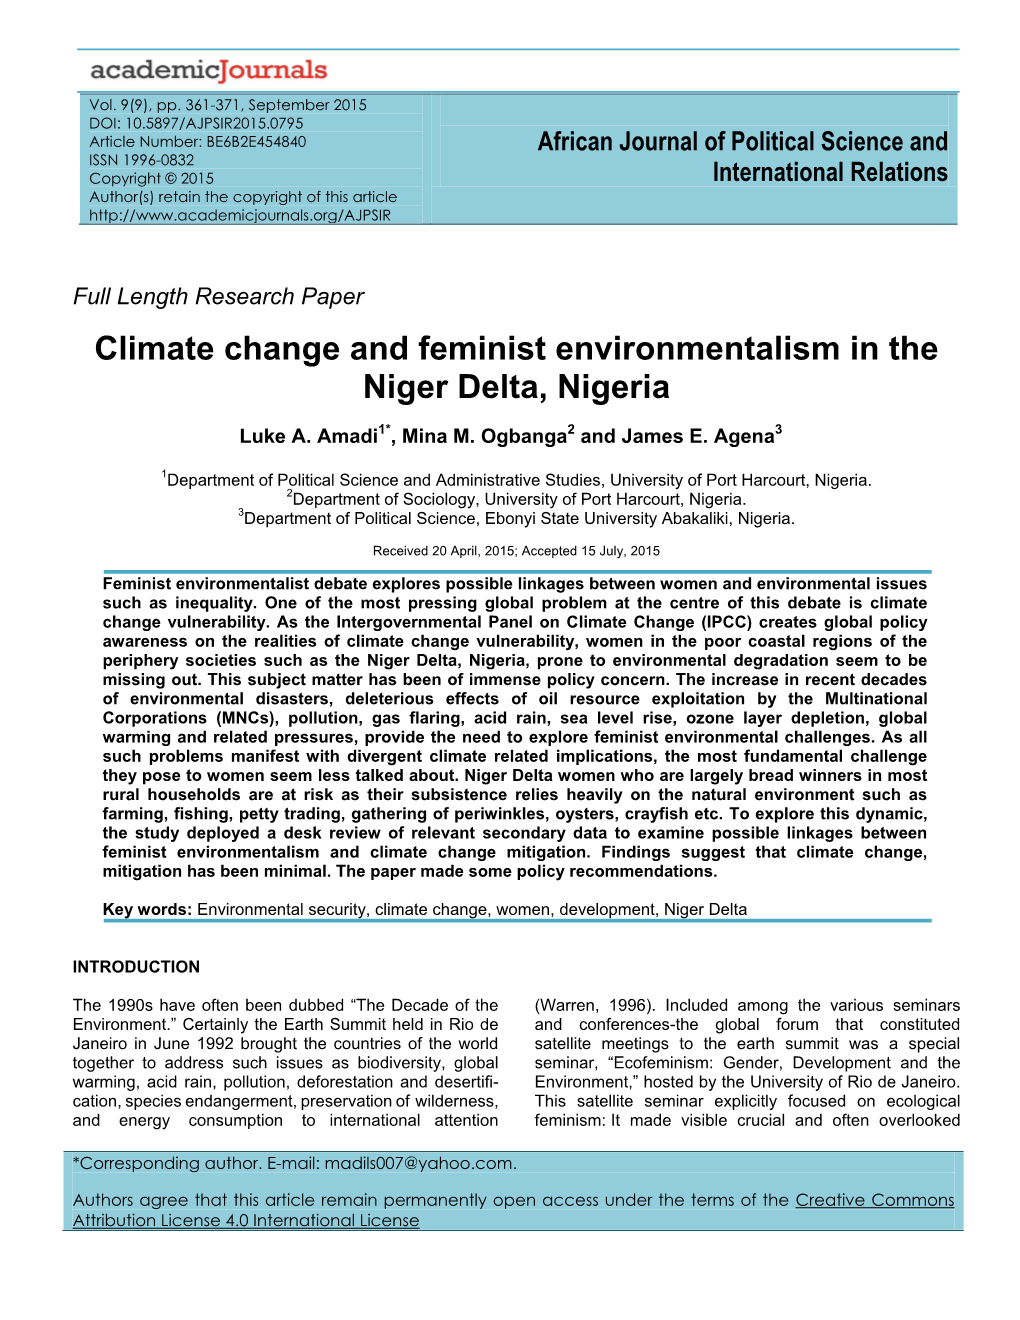 Climate Change and Feminist Environmentalism in the Niger Delta, Nigeria